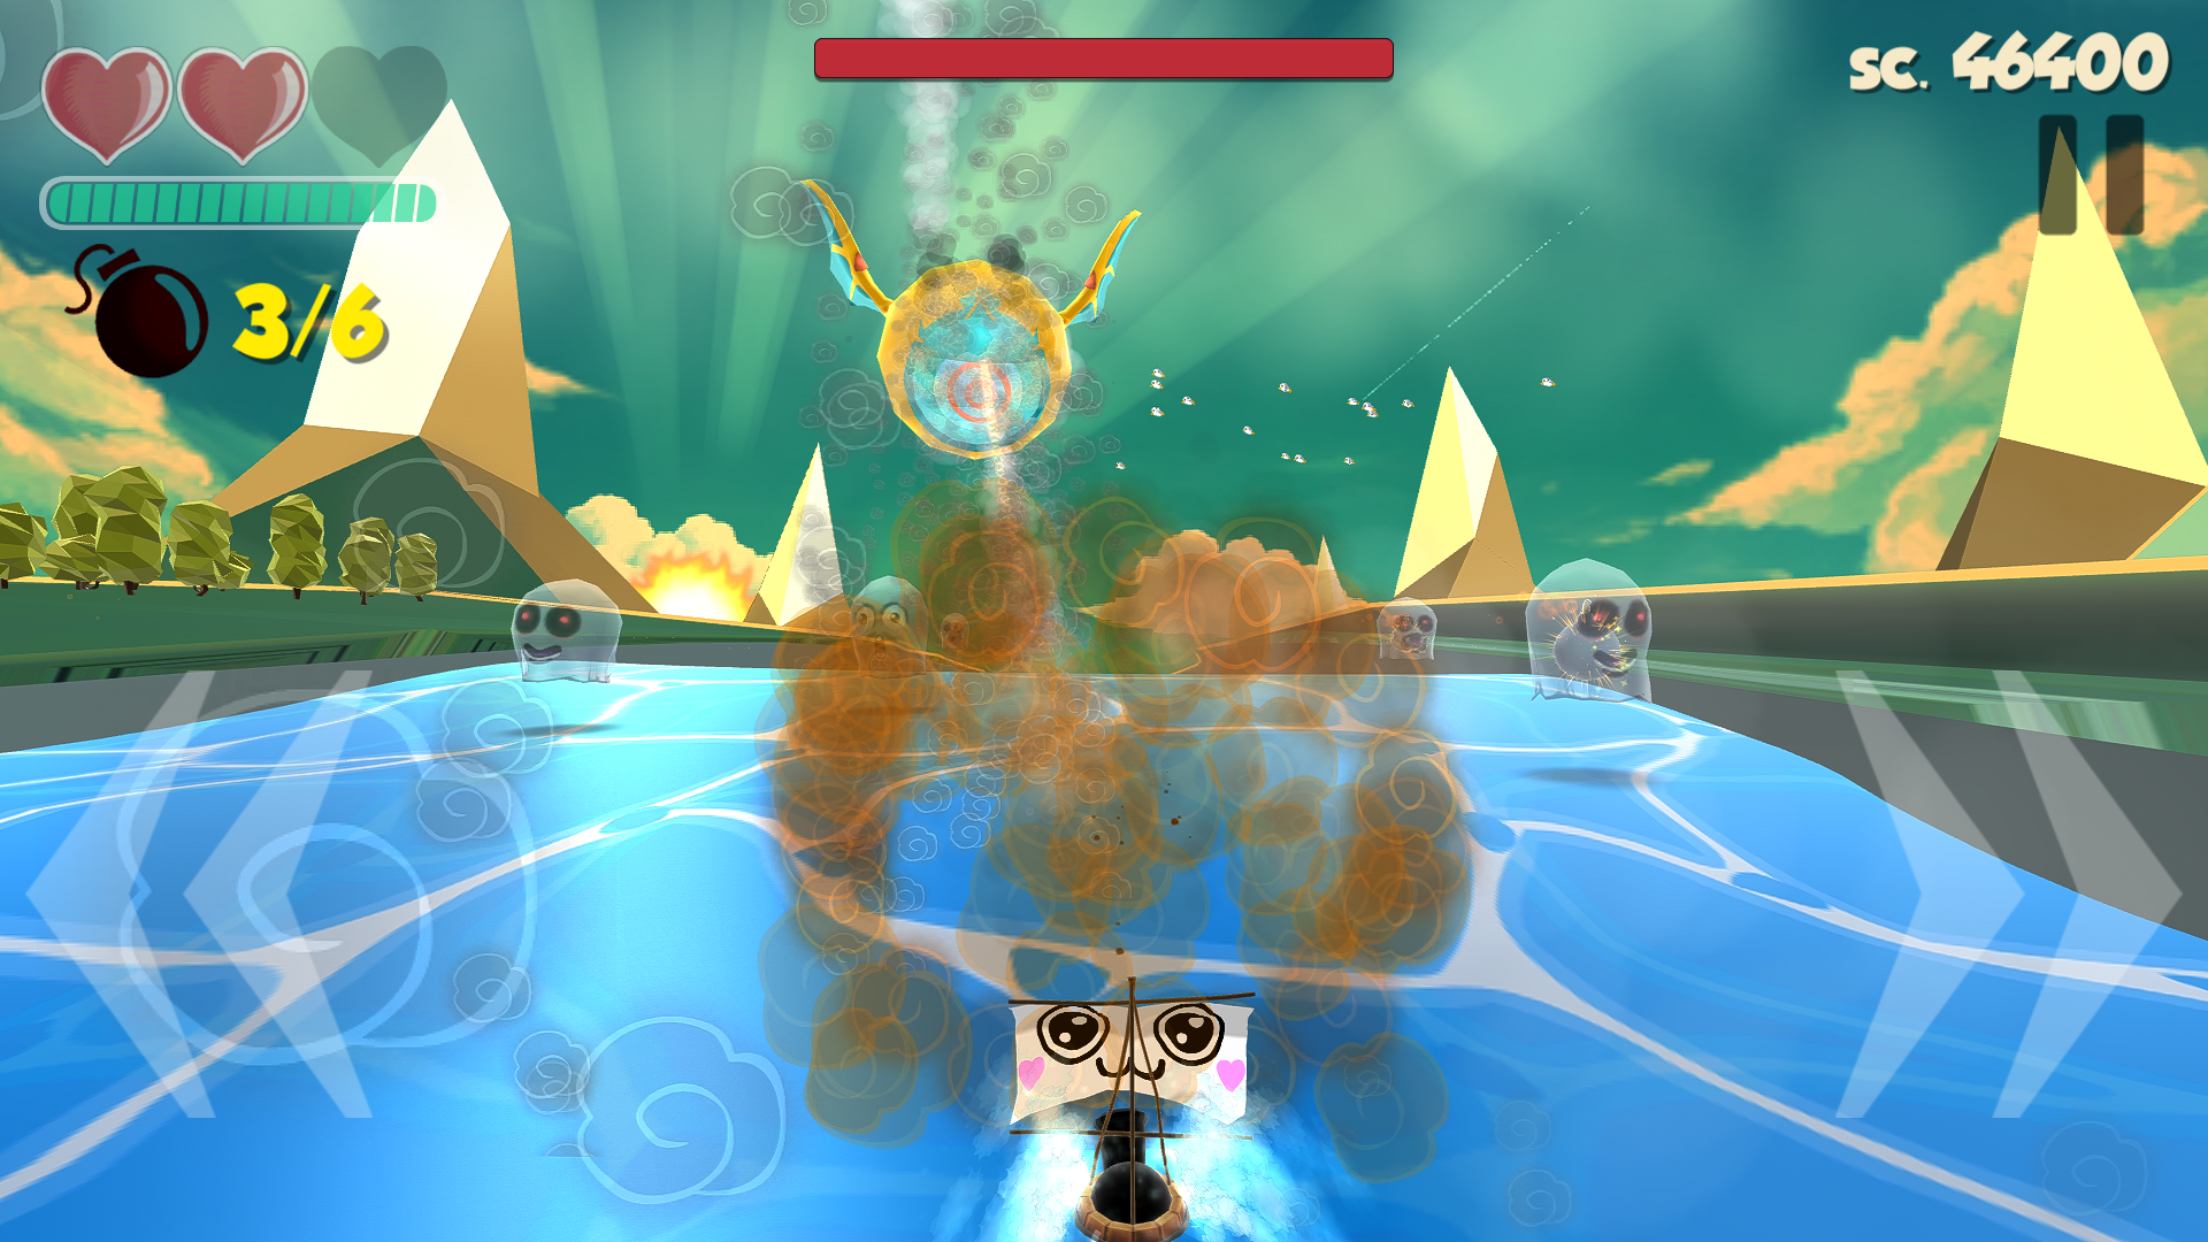 Conquer the sea in easyBoat, an arcade style shooter game for iPhone and iPad